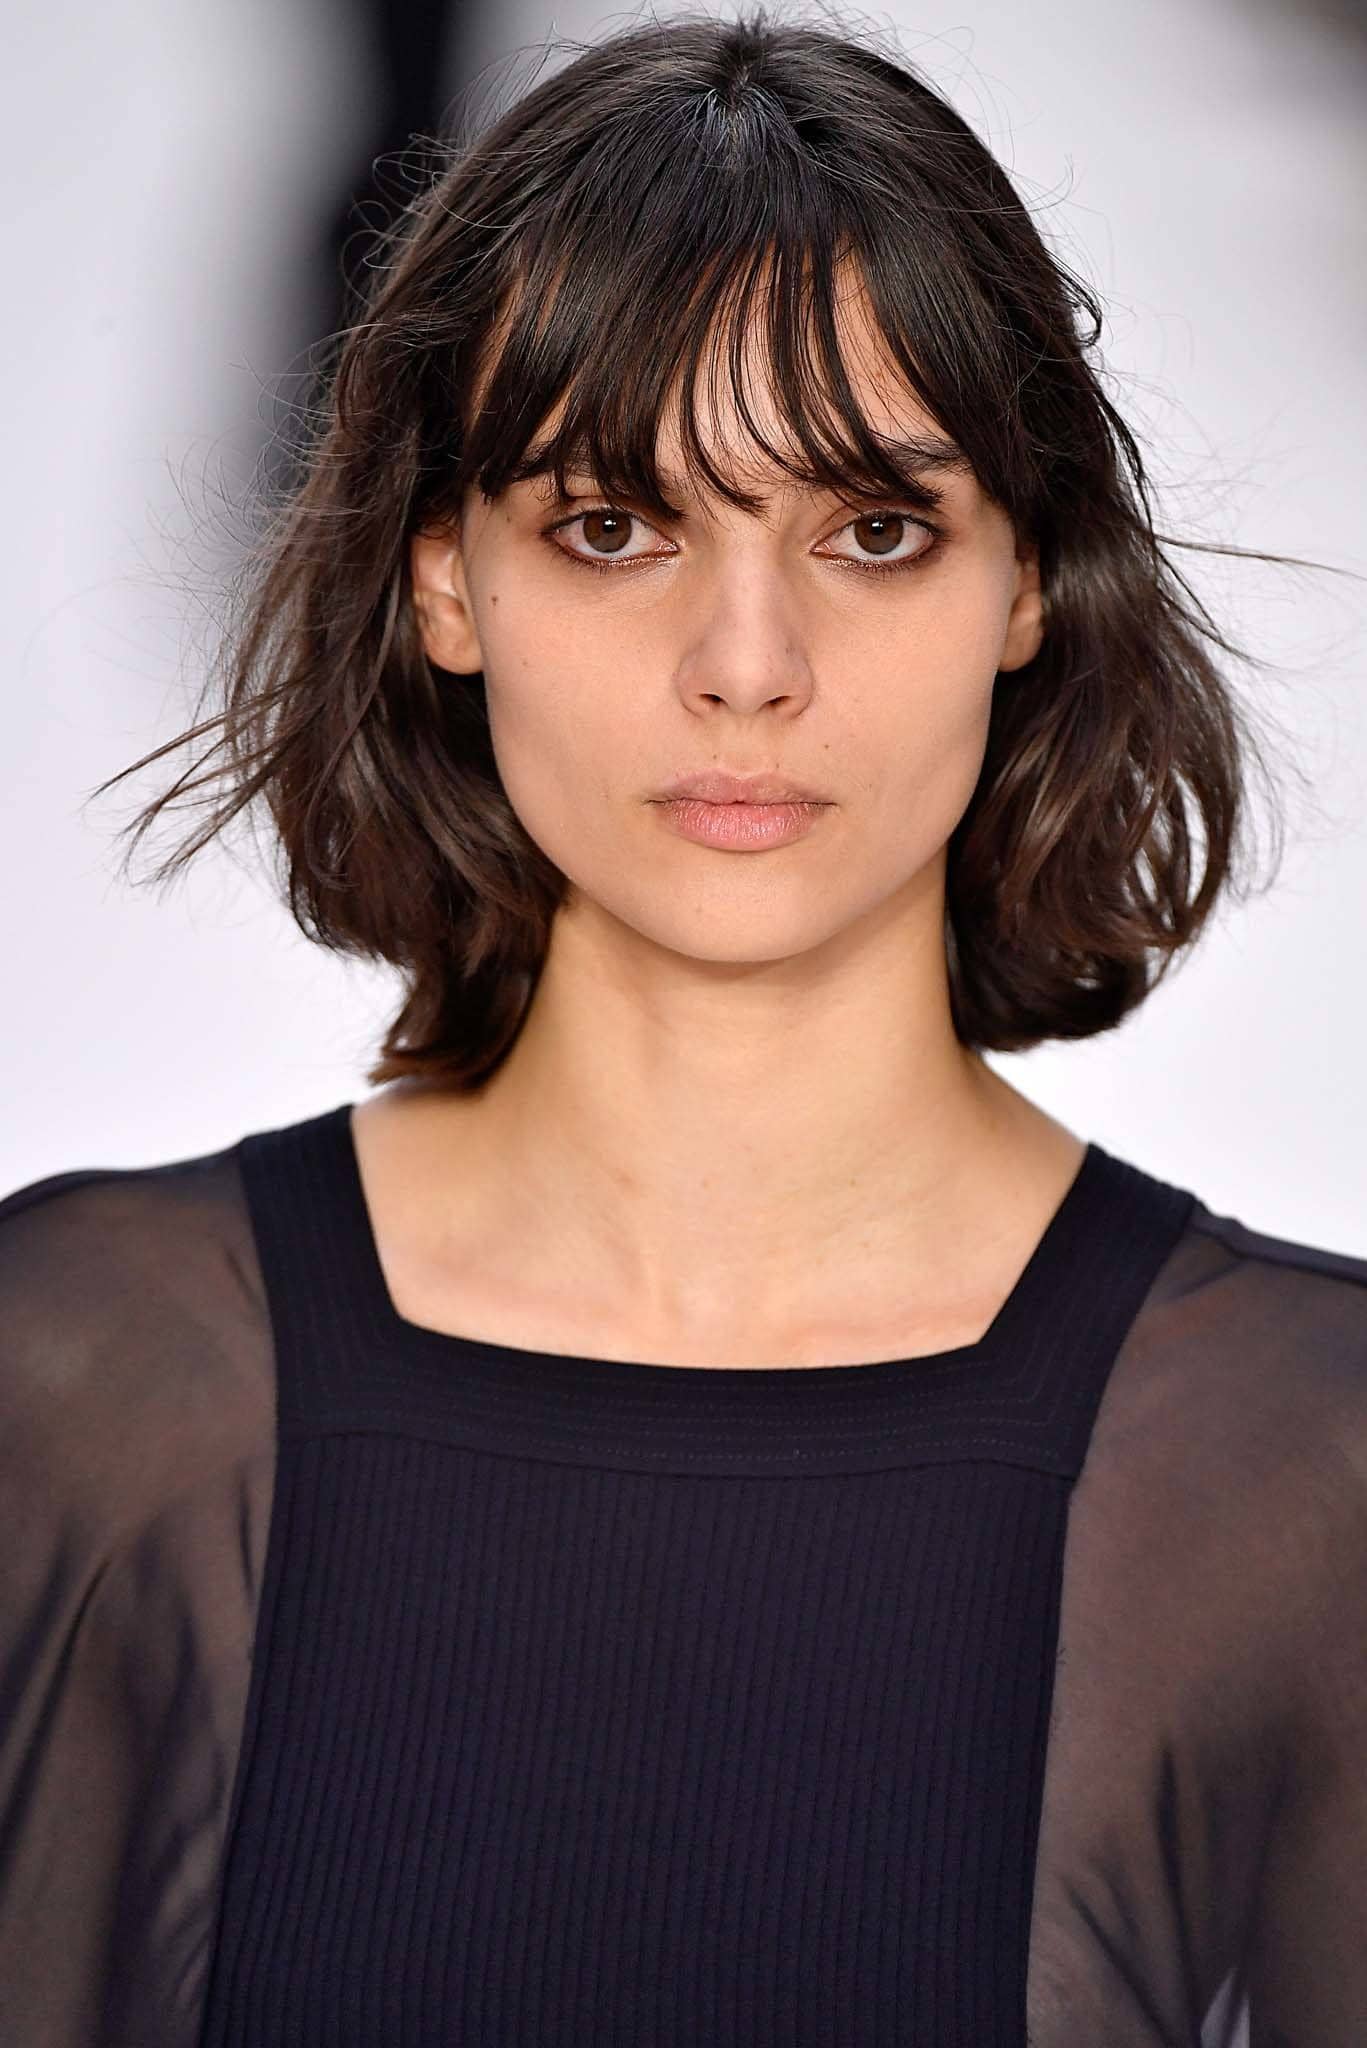 Bangs 2018 For Your Hair - Bangs Hairstyles